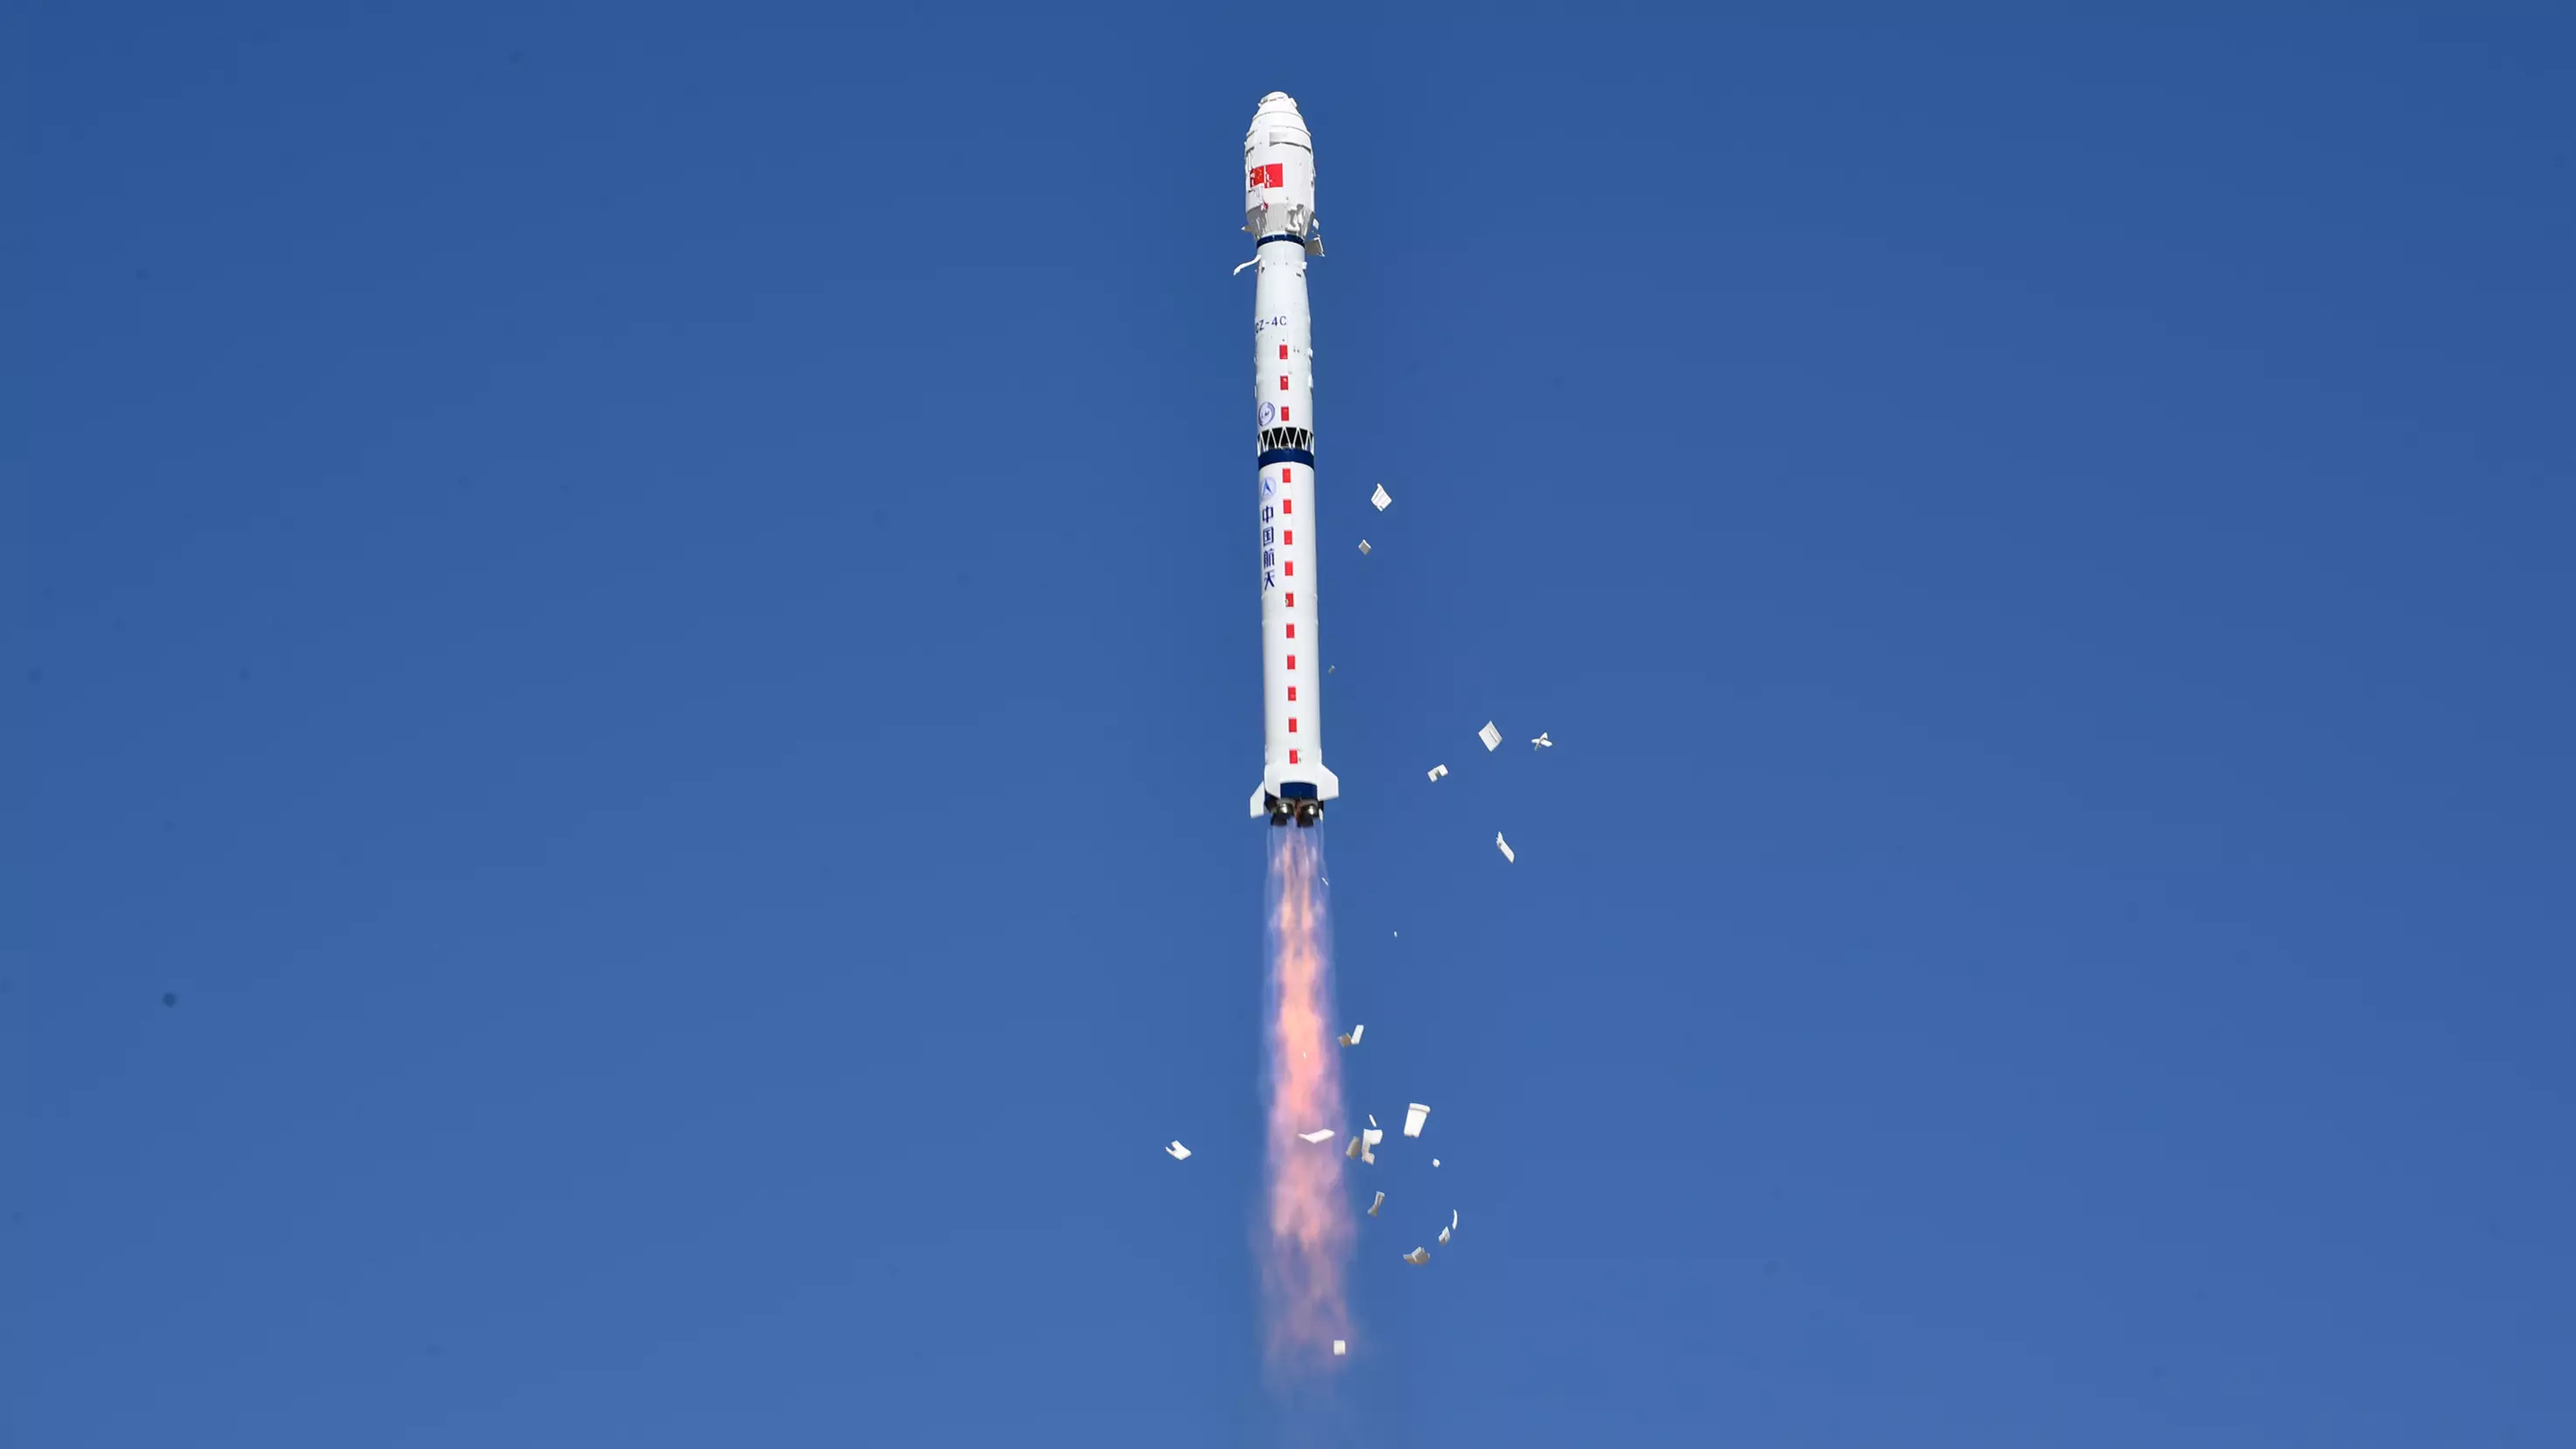 Chinese Rocket To Make Uncontrolled Re-Entry And Debris Could Fall On Populated Areas